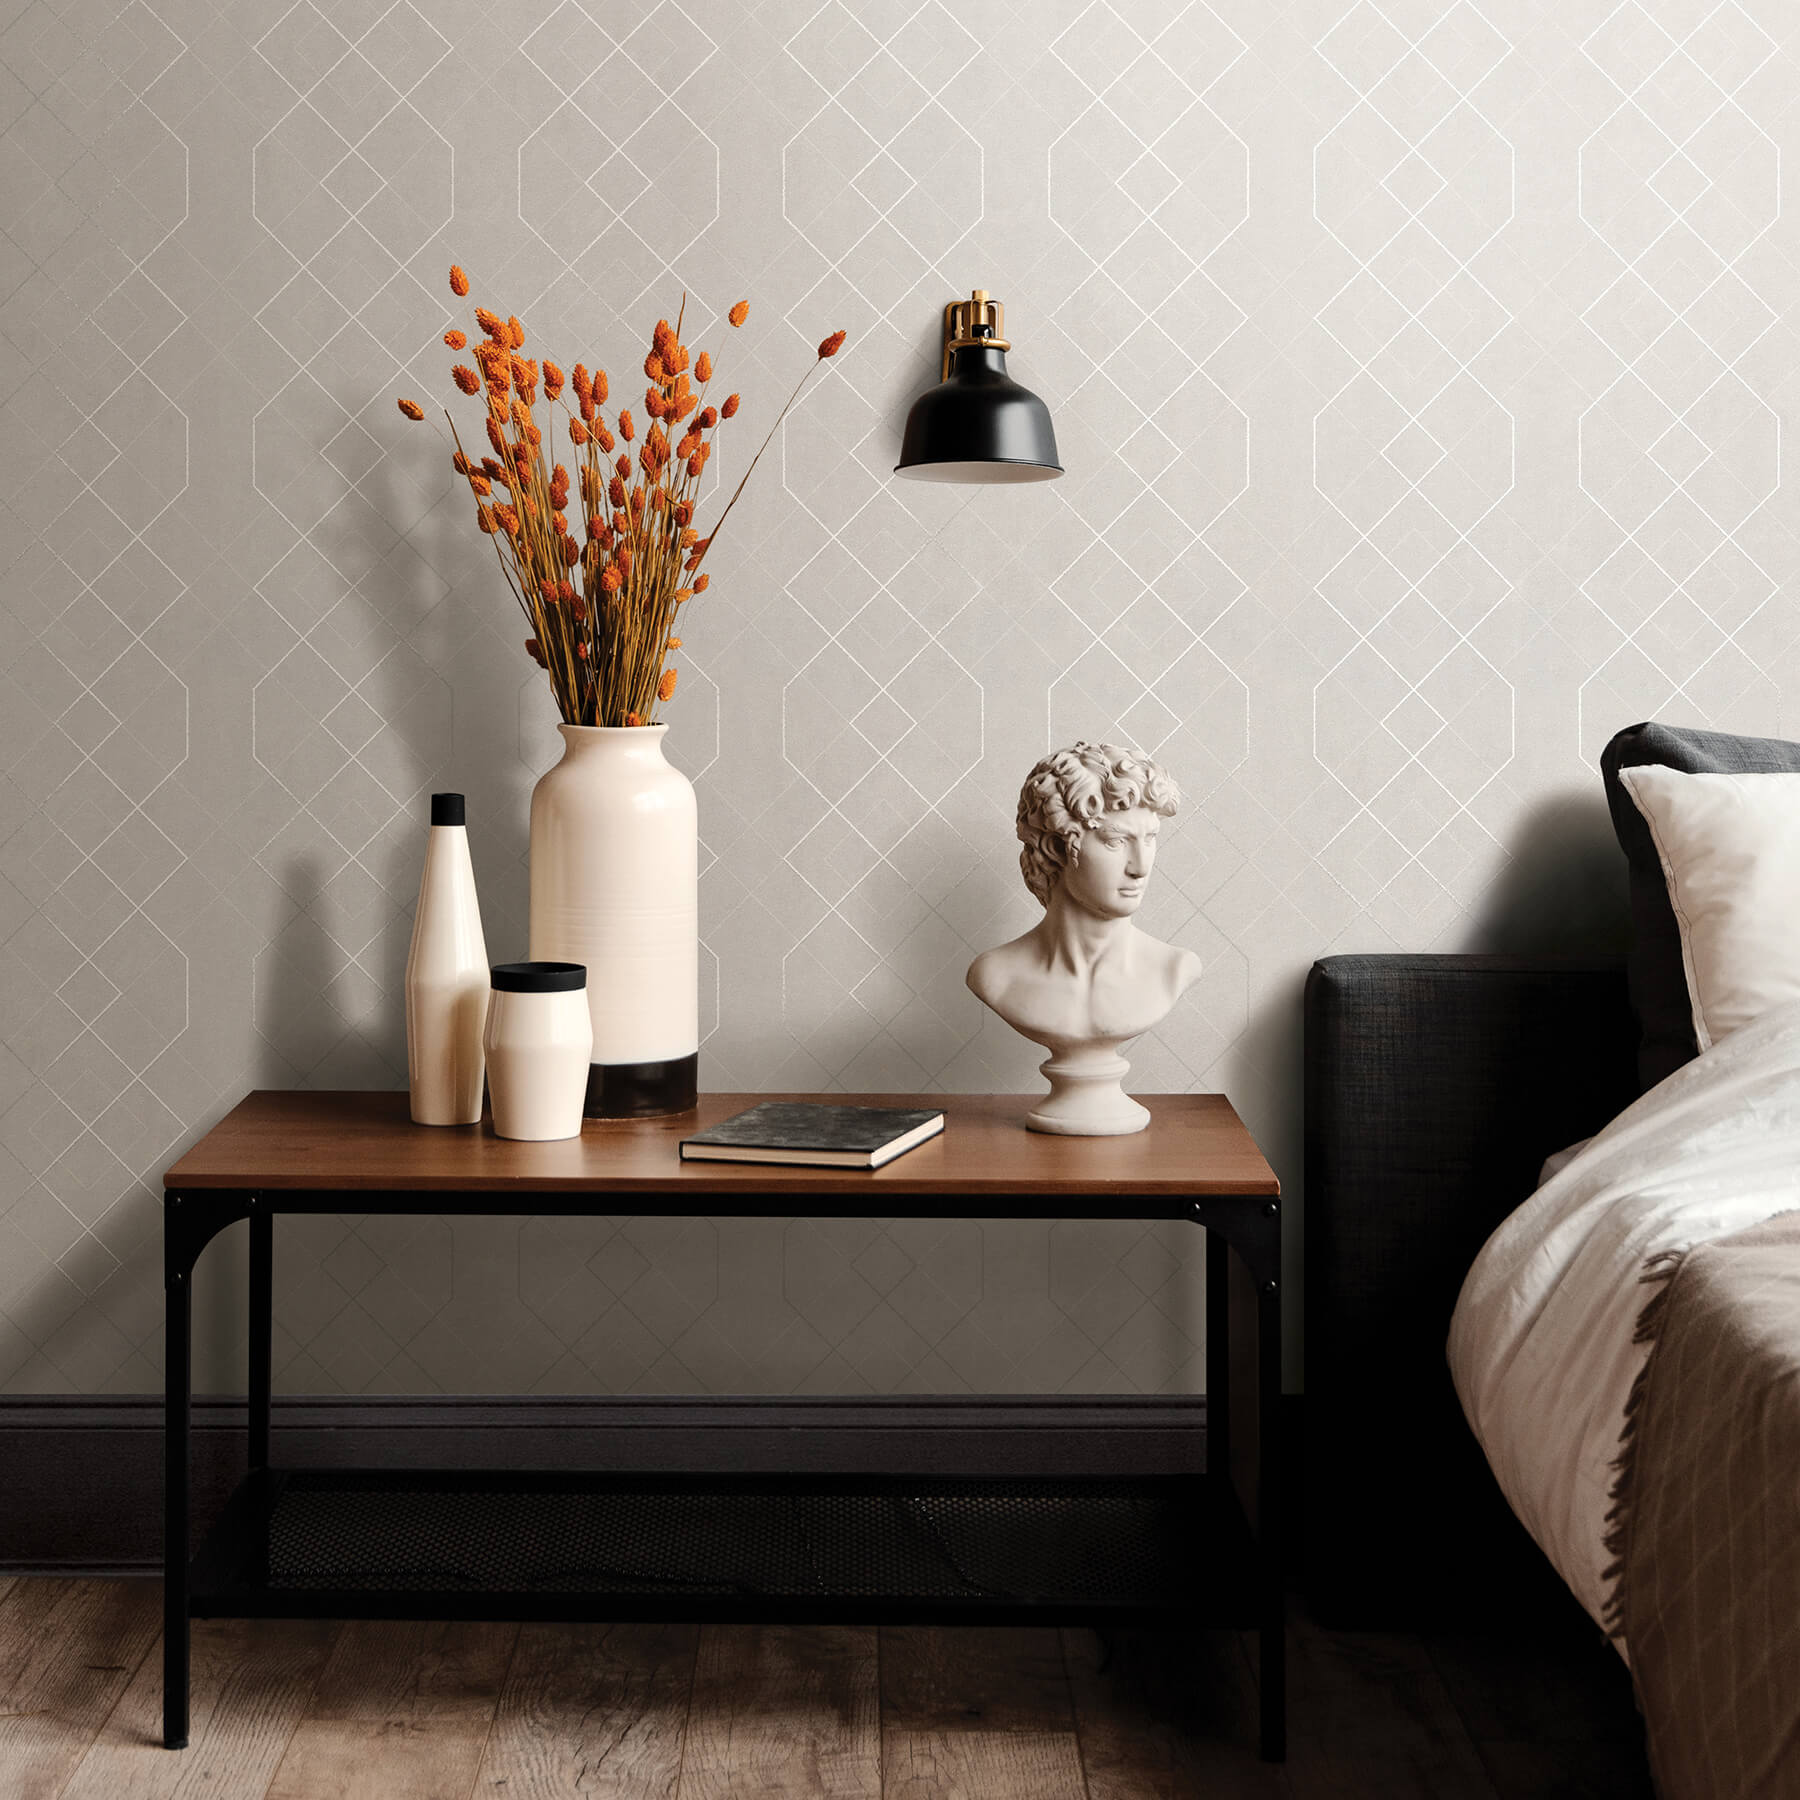 Wallpaper Ideas and Inspiration